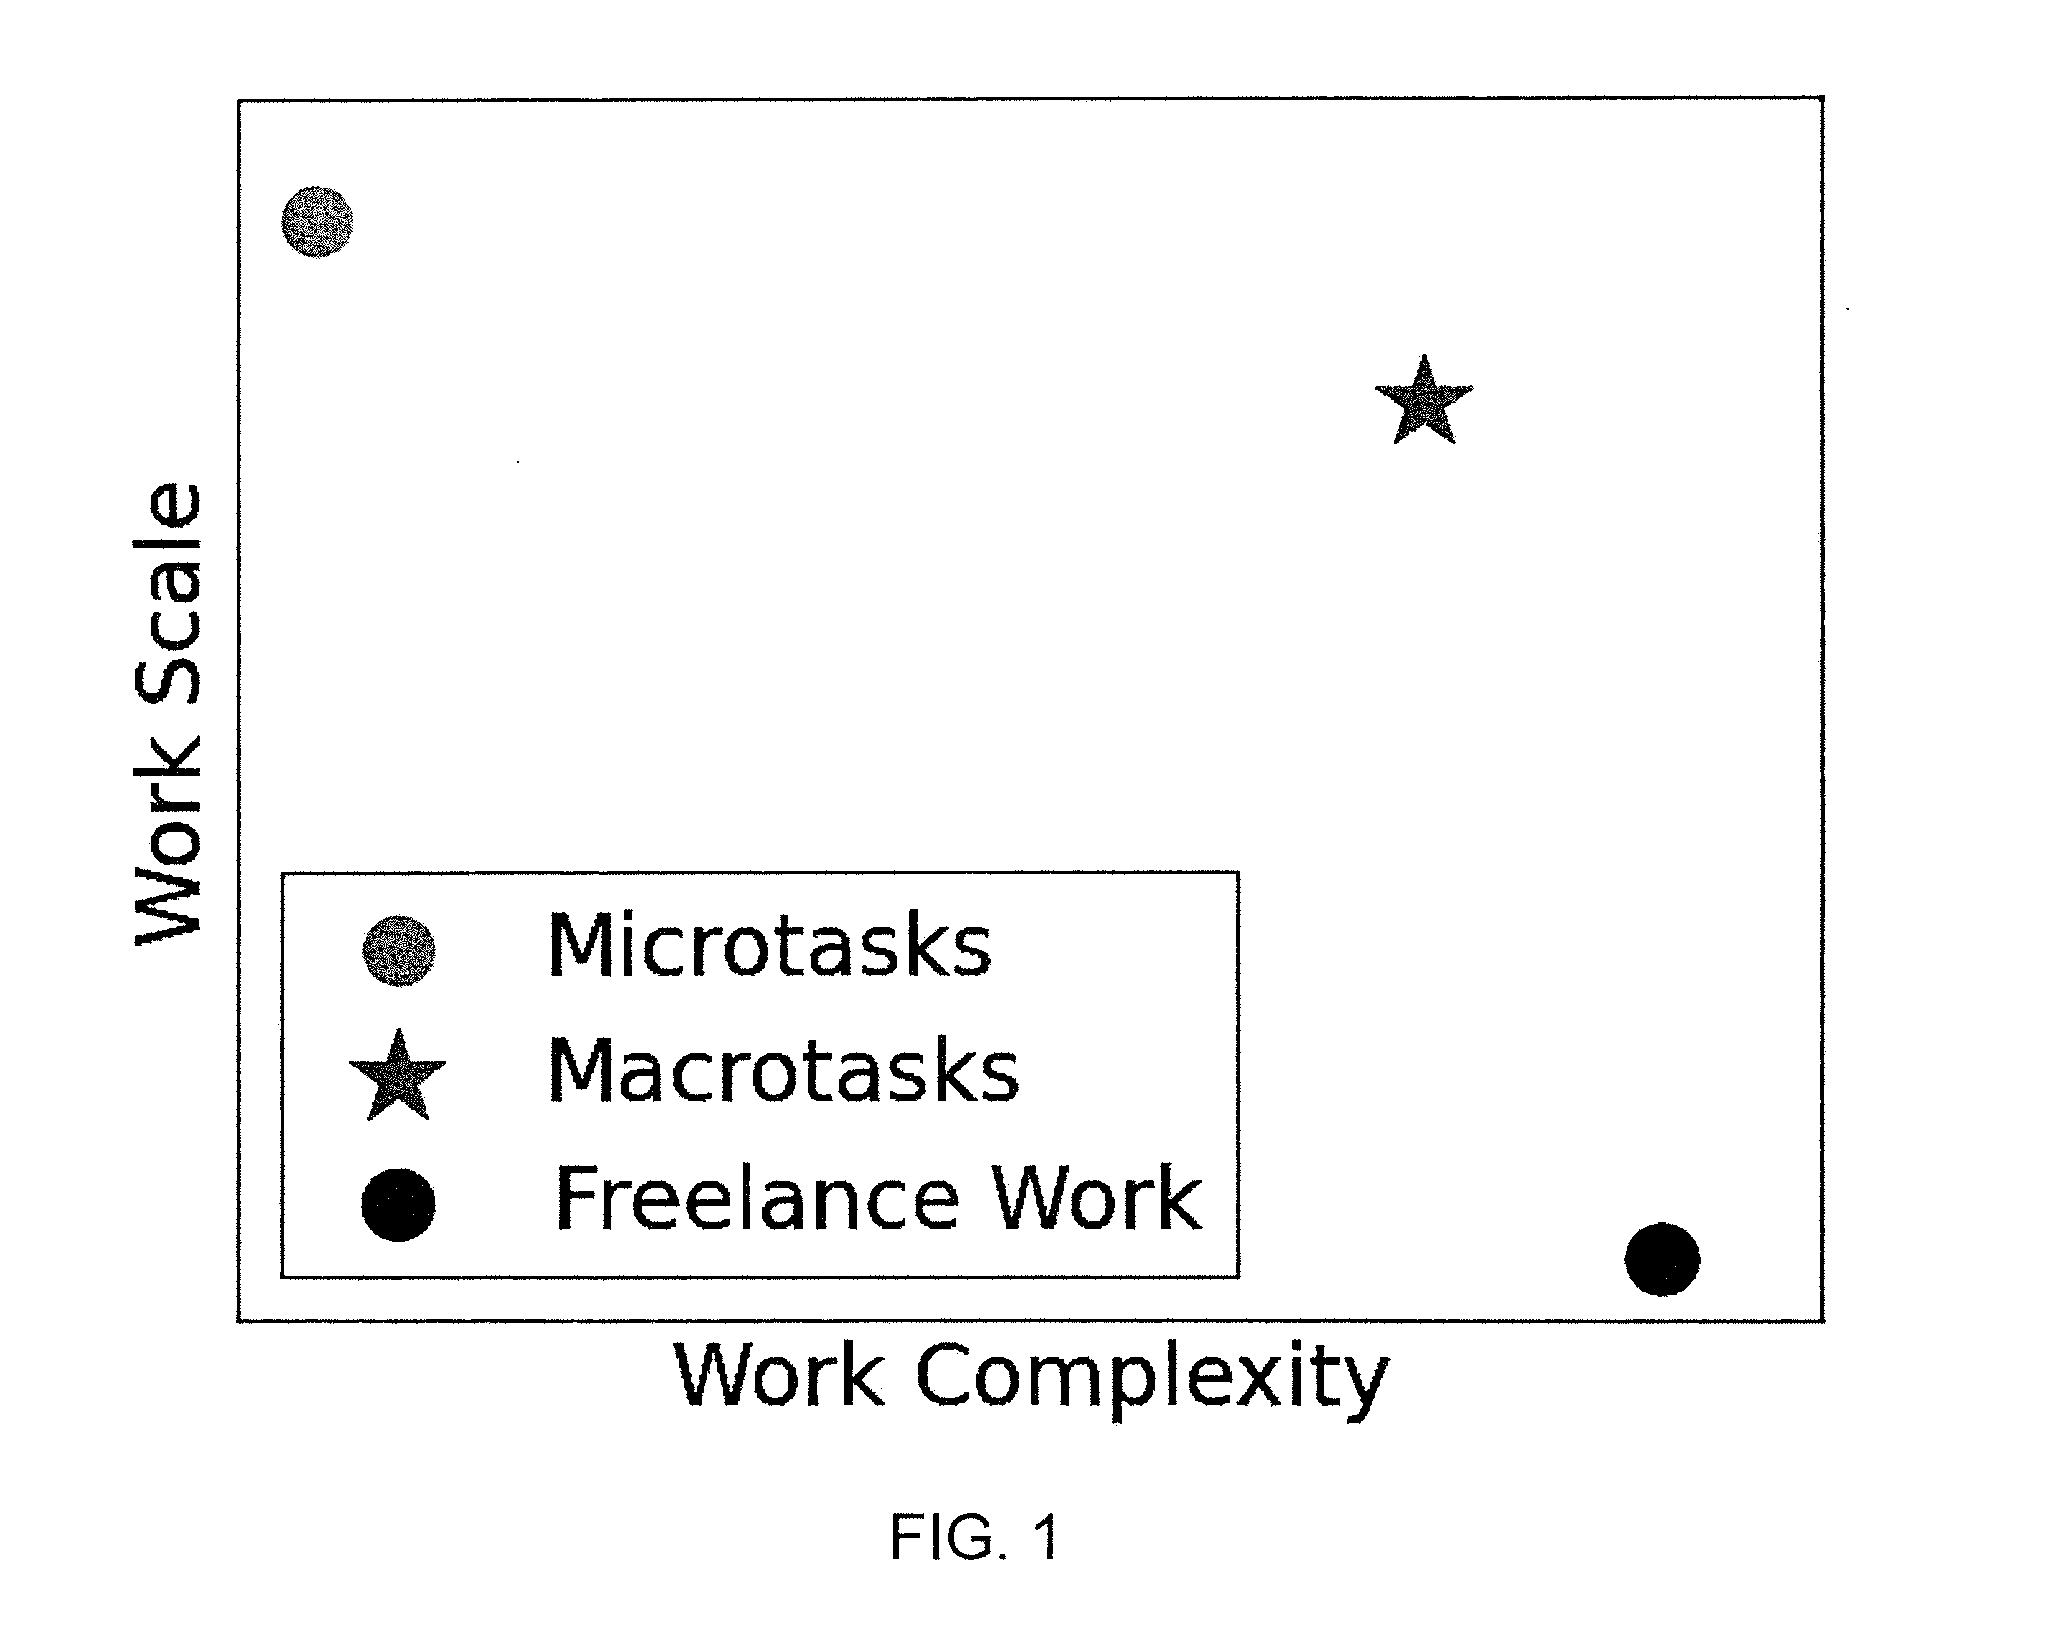 Workflow management for crowd worker tasks with fixed throughput and budgets